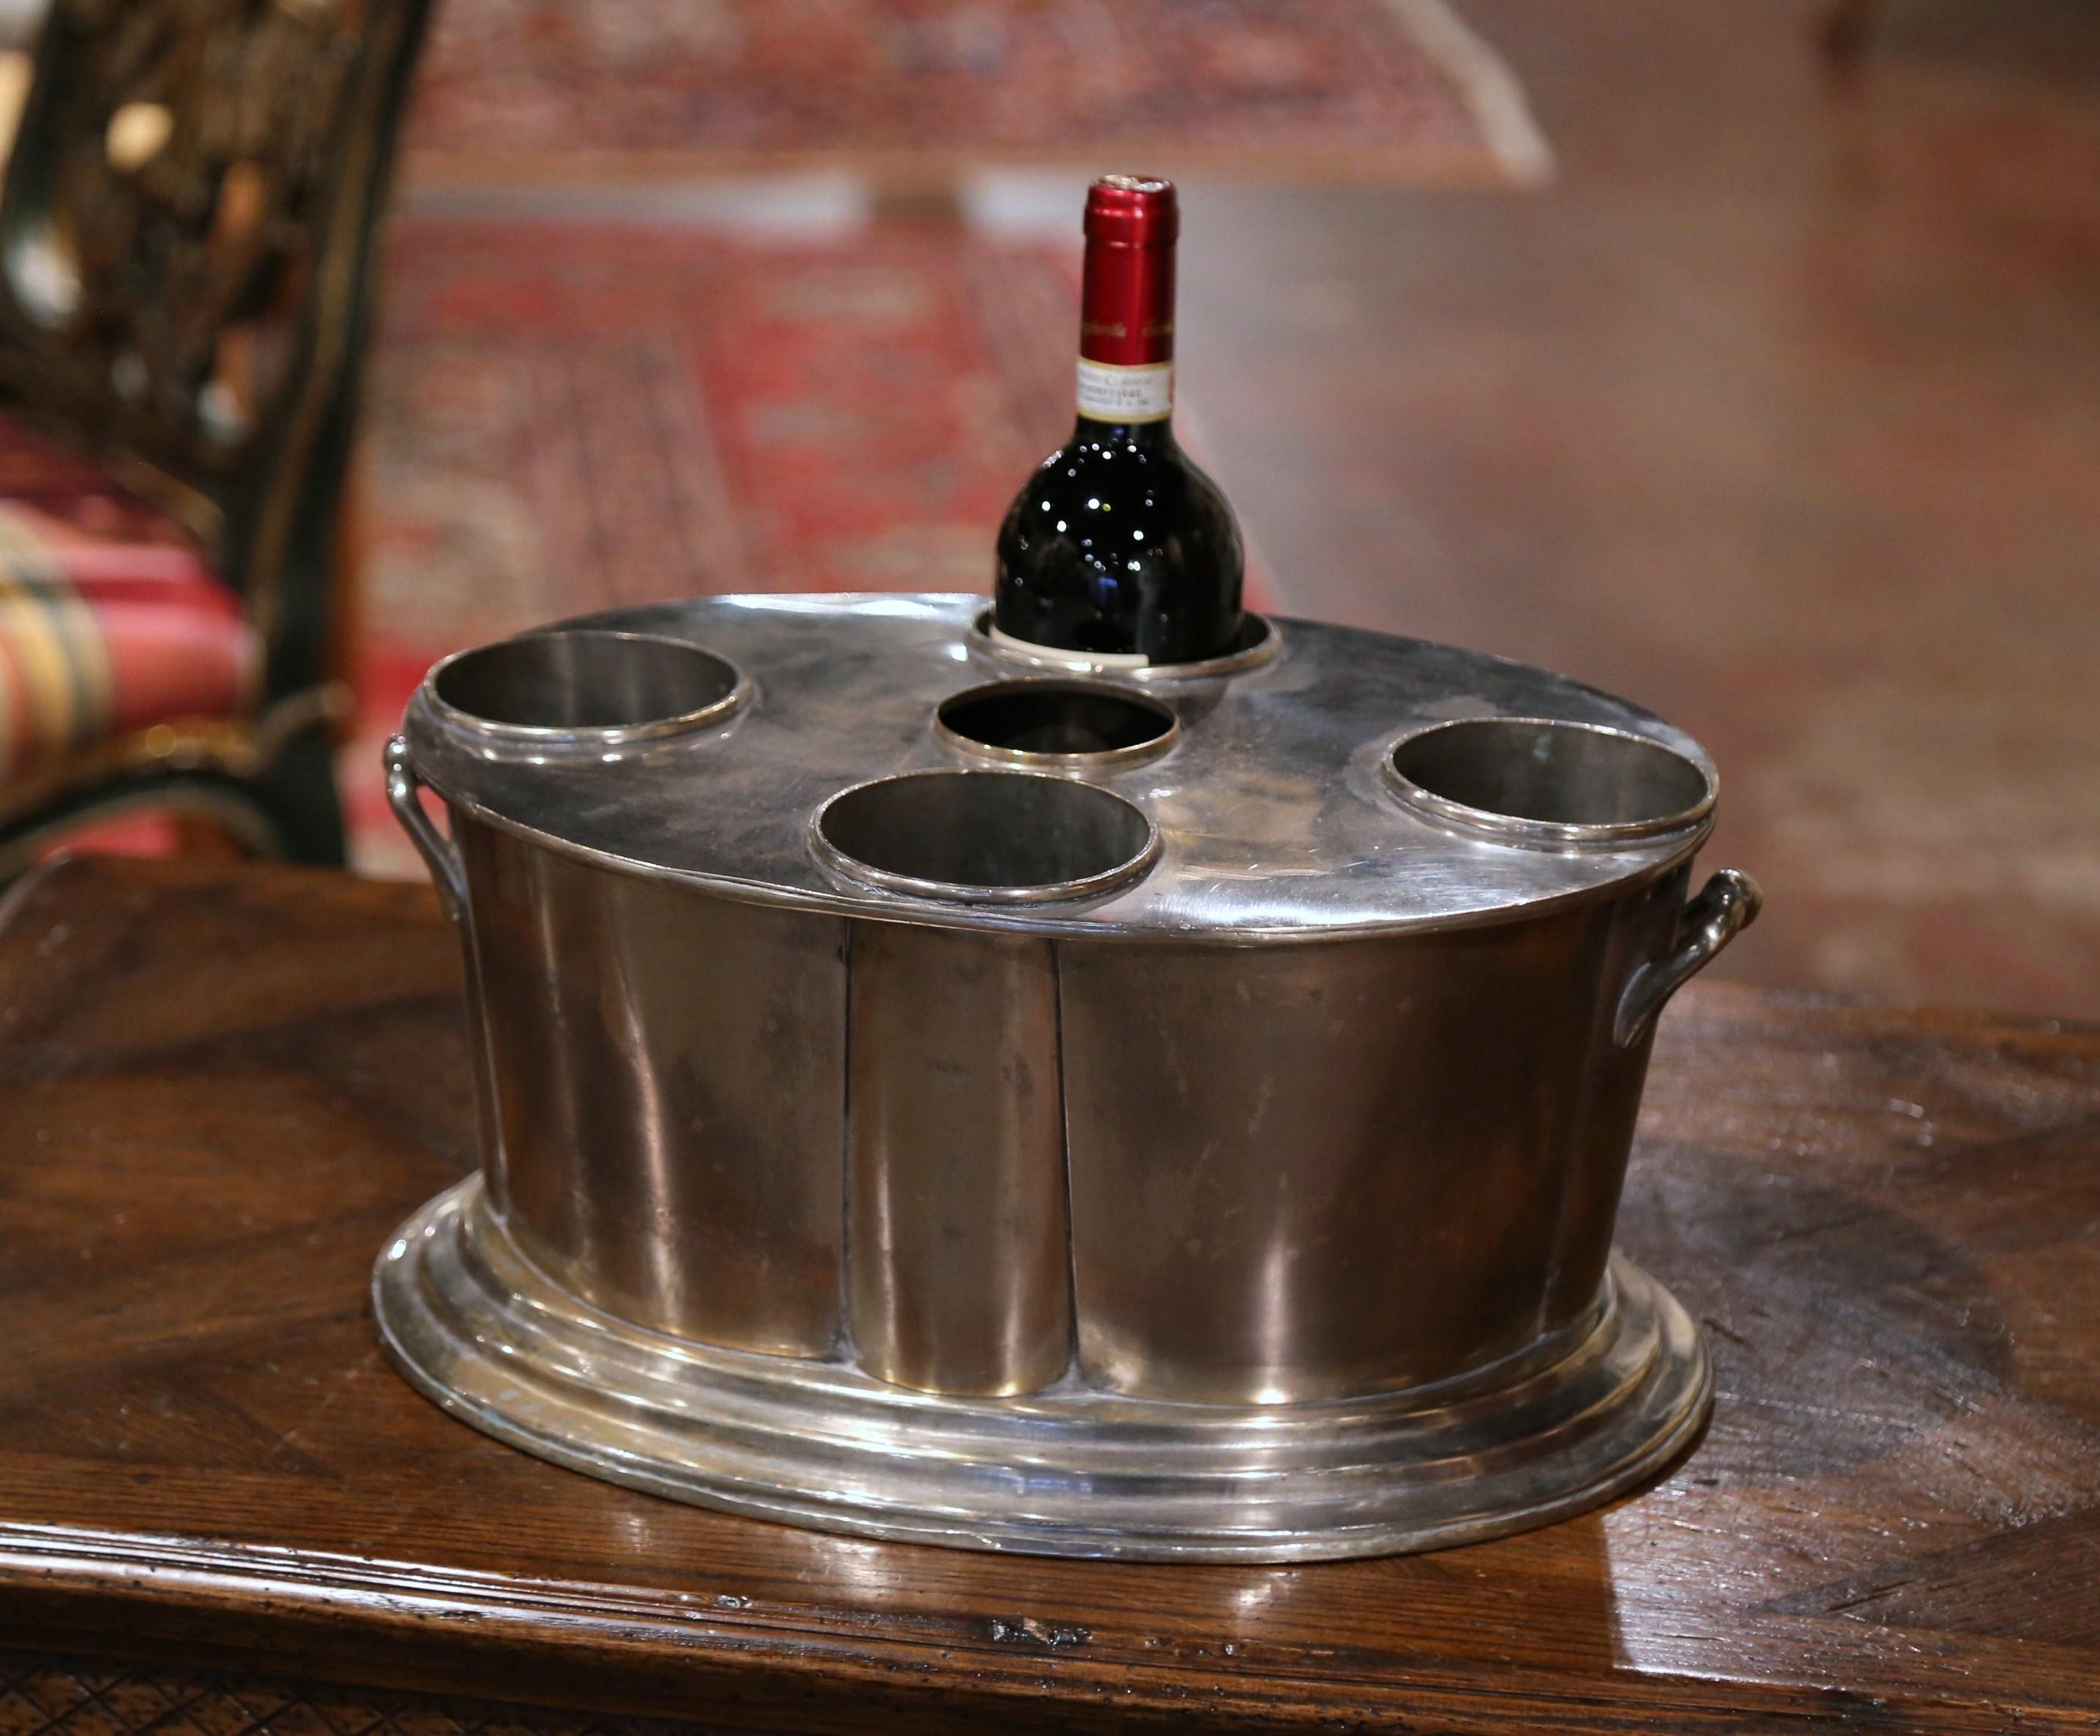 Keep your wine bottles chilled in this antique 